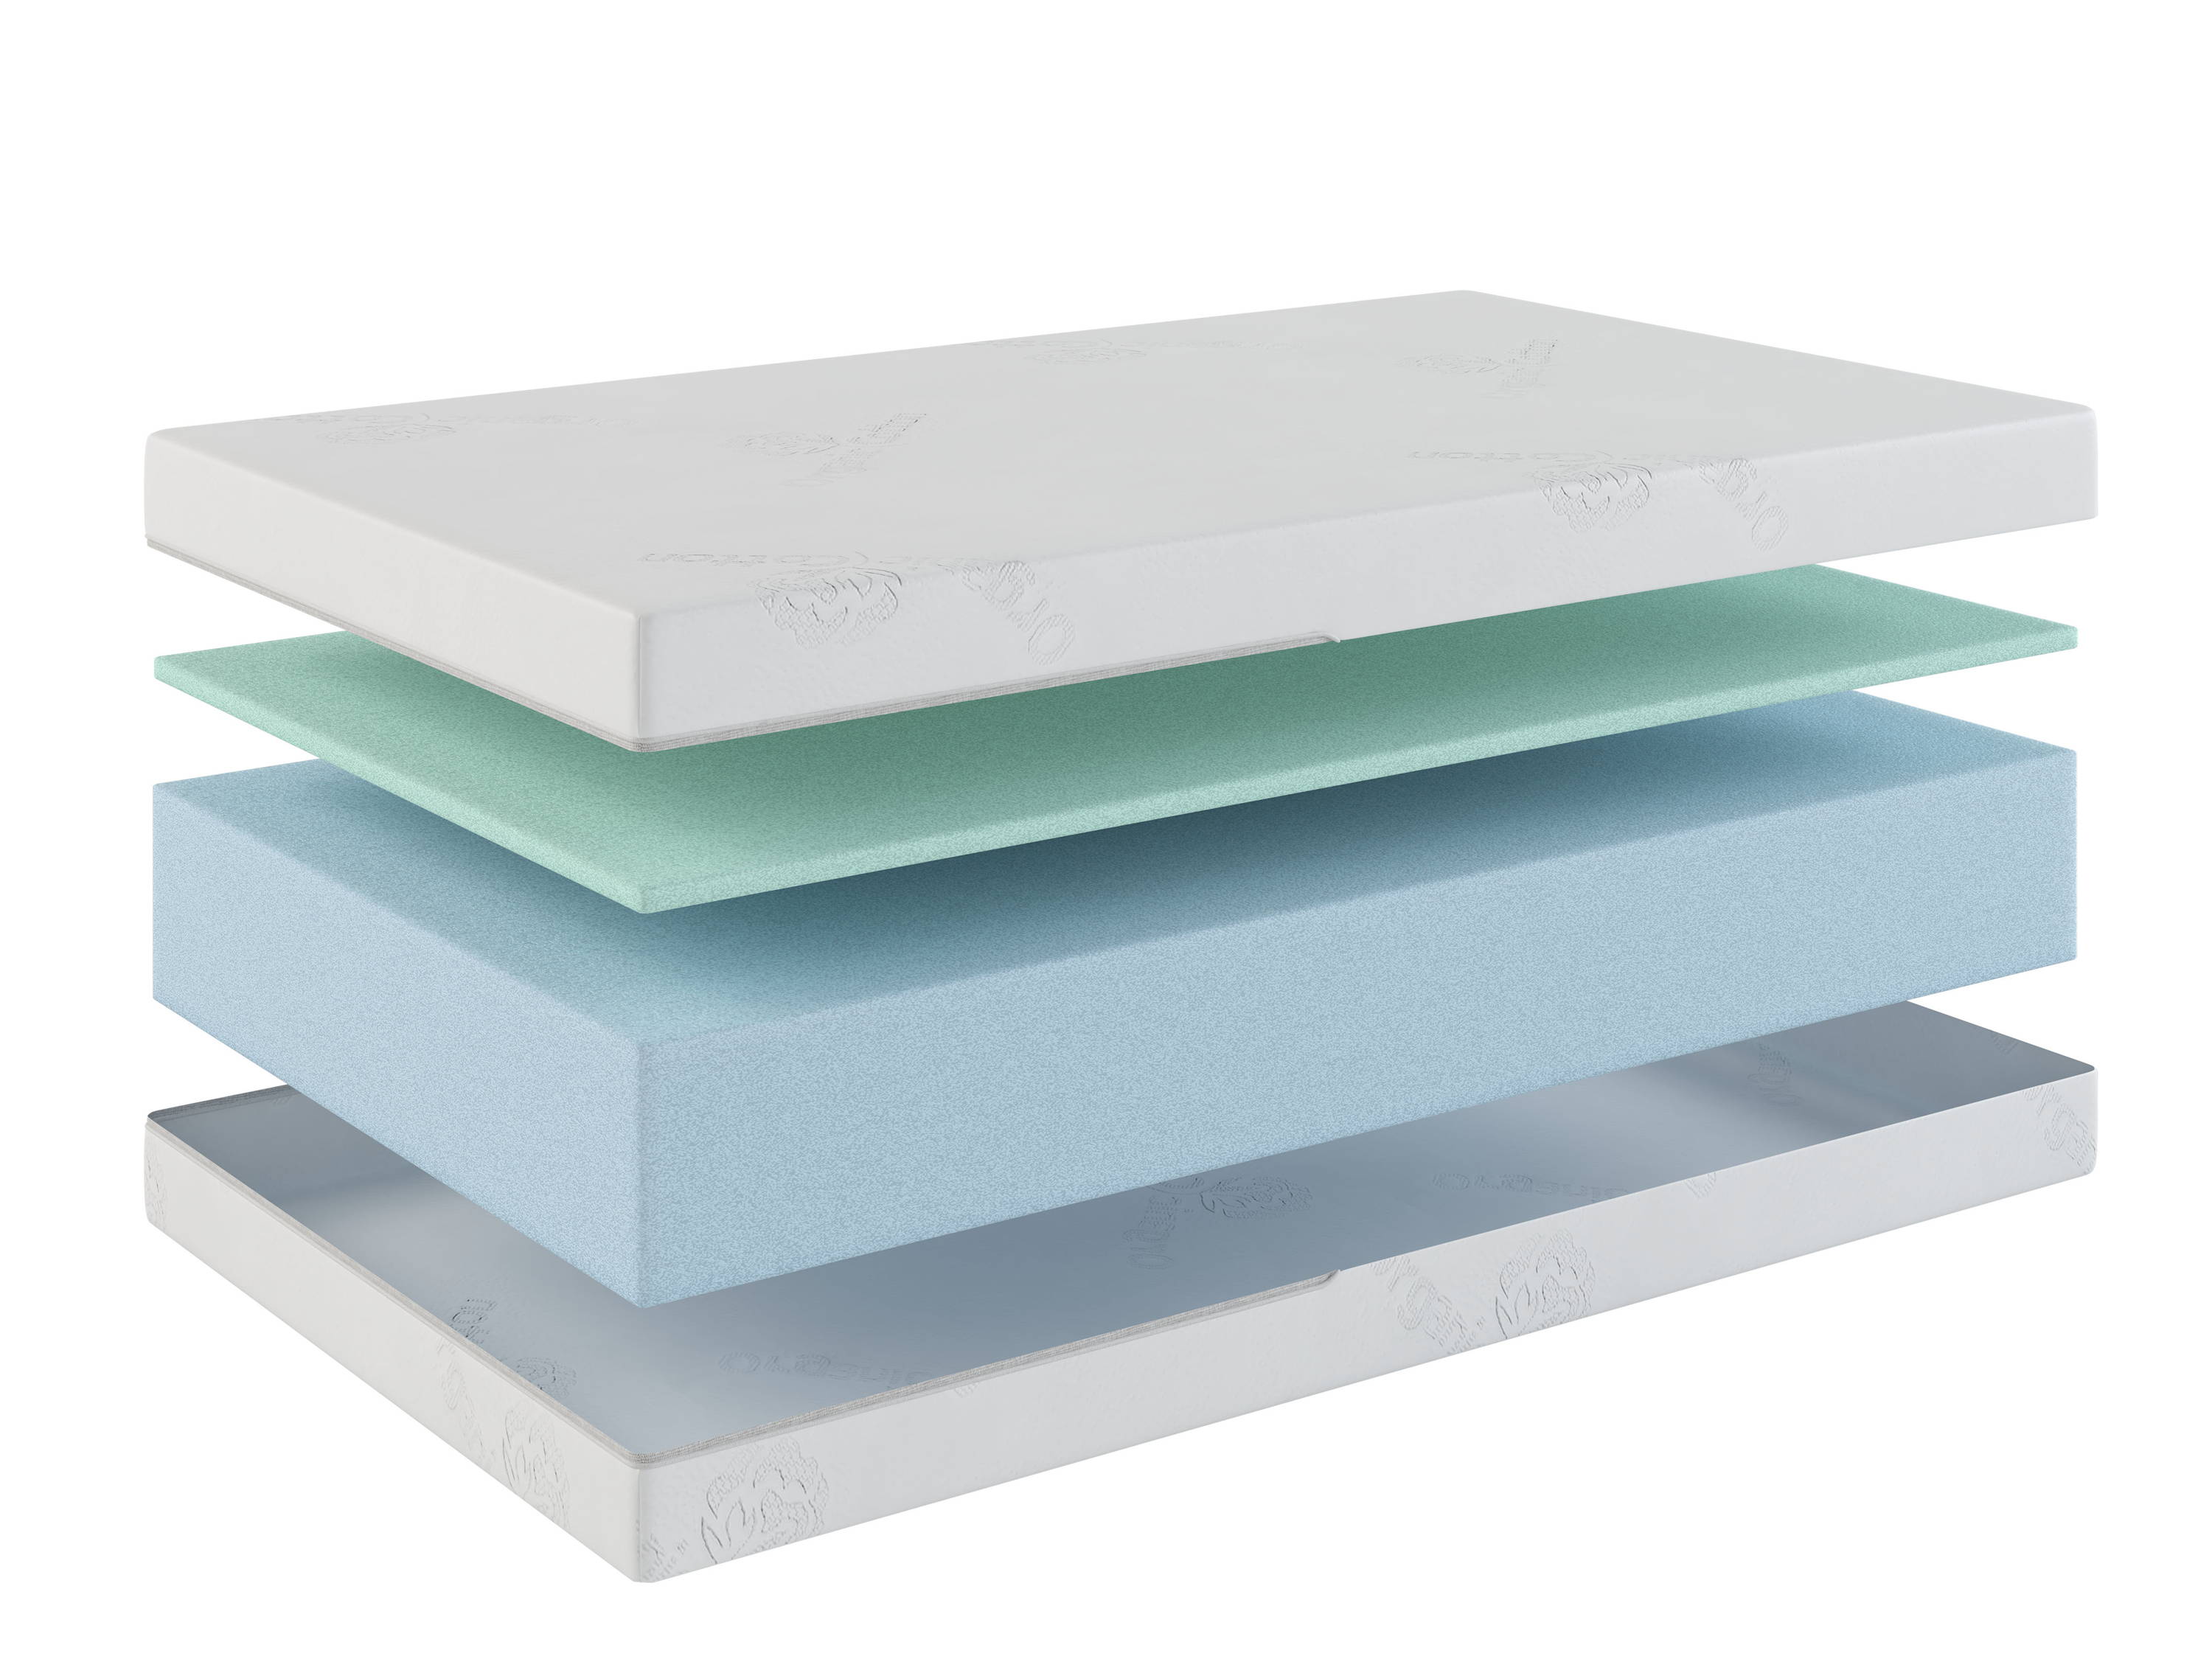 ergoBean Traditions crib mattress layers showing two breathable internal layers and a waterproof organic cotton cover.